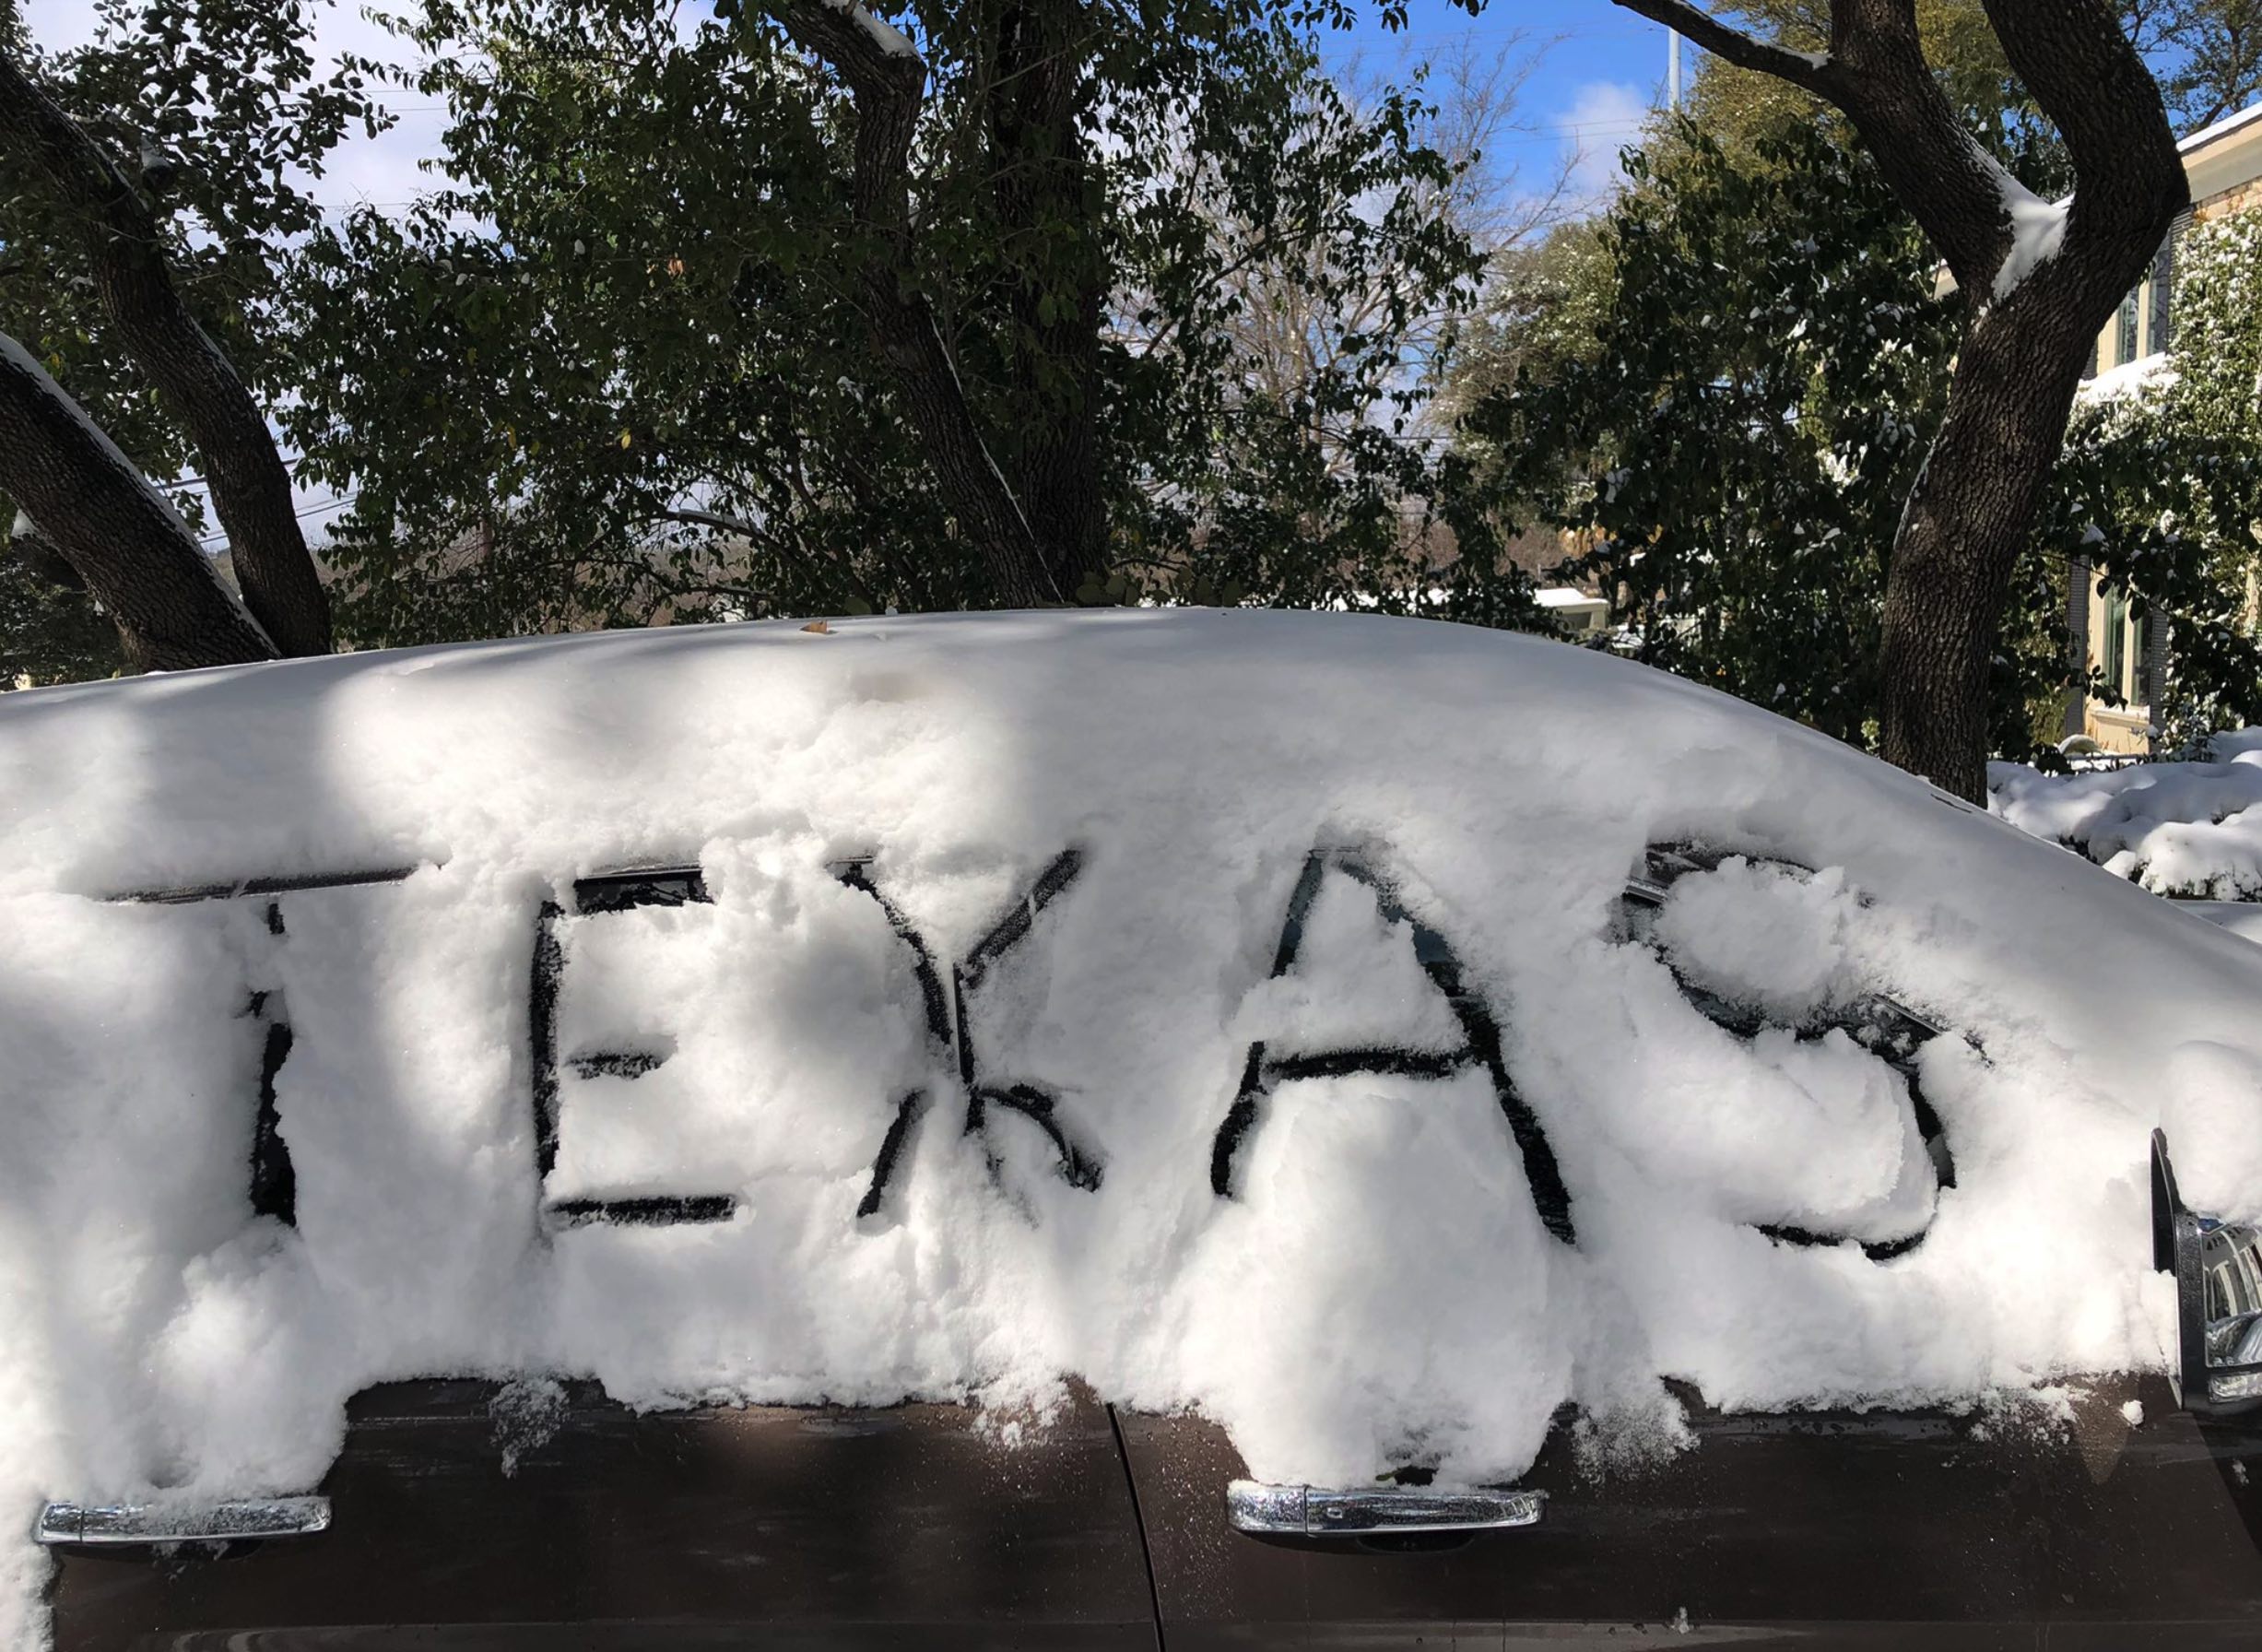 A car covered in snow with the word "Texas" drawn in the snow, taken during Winter Storm Uri in February 2021